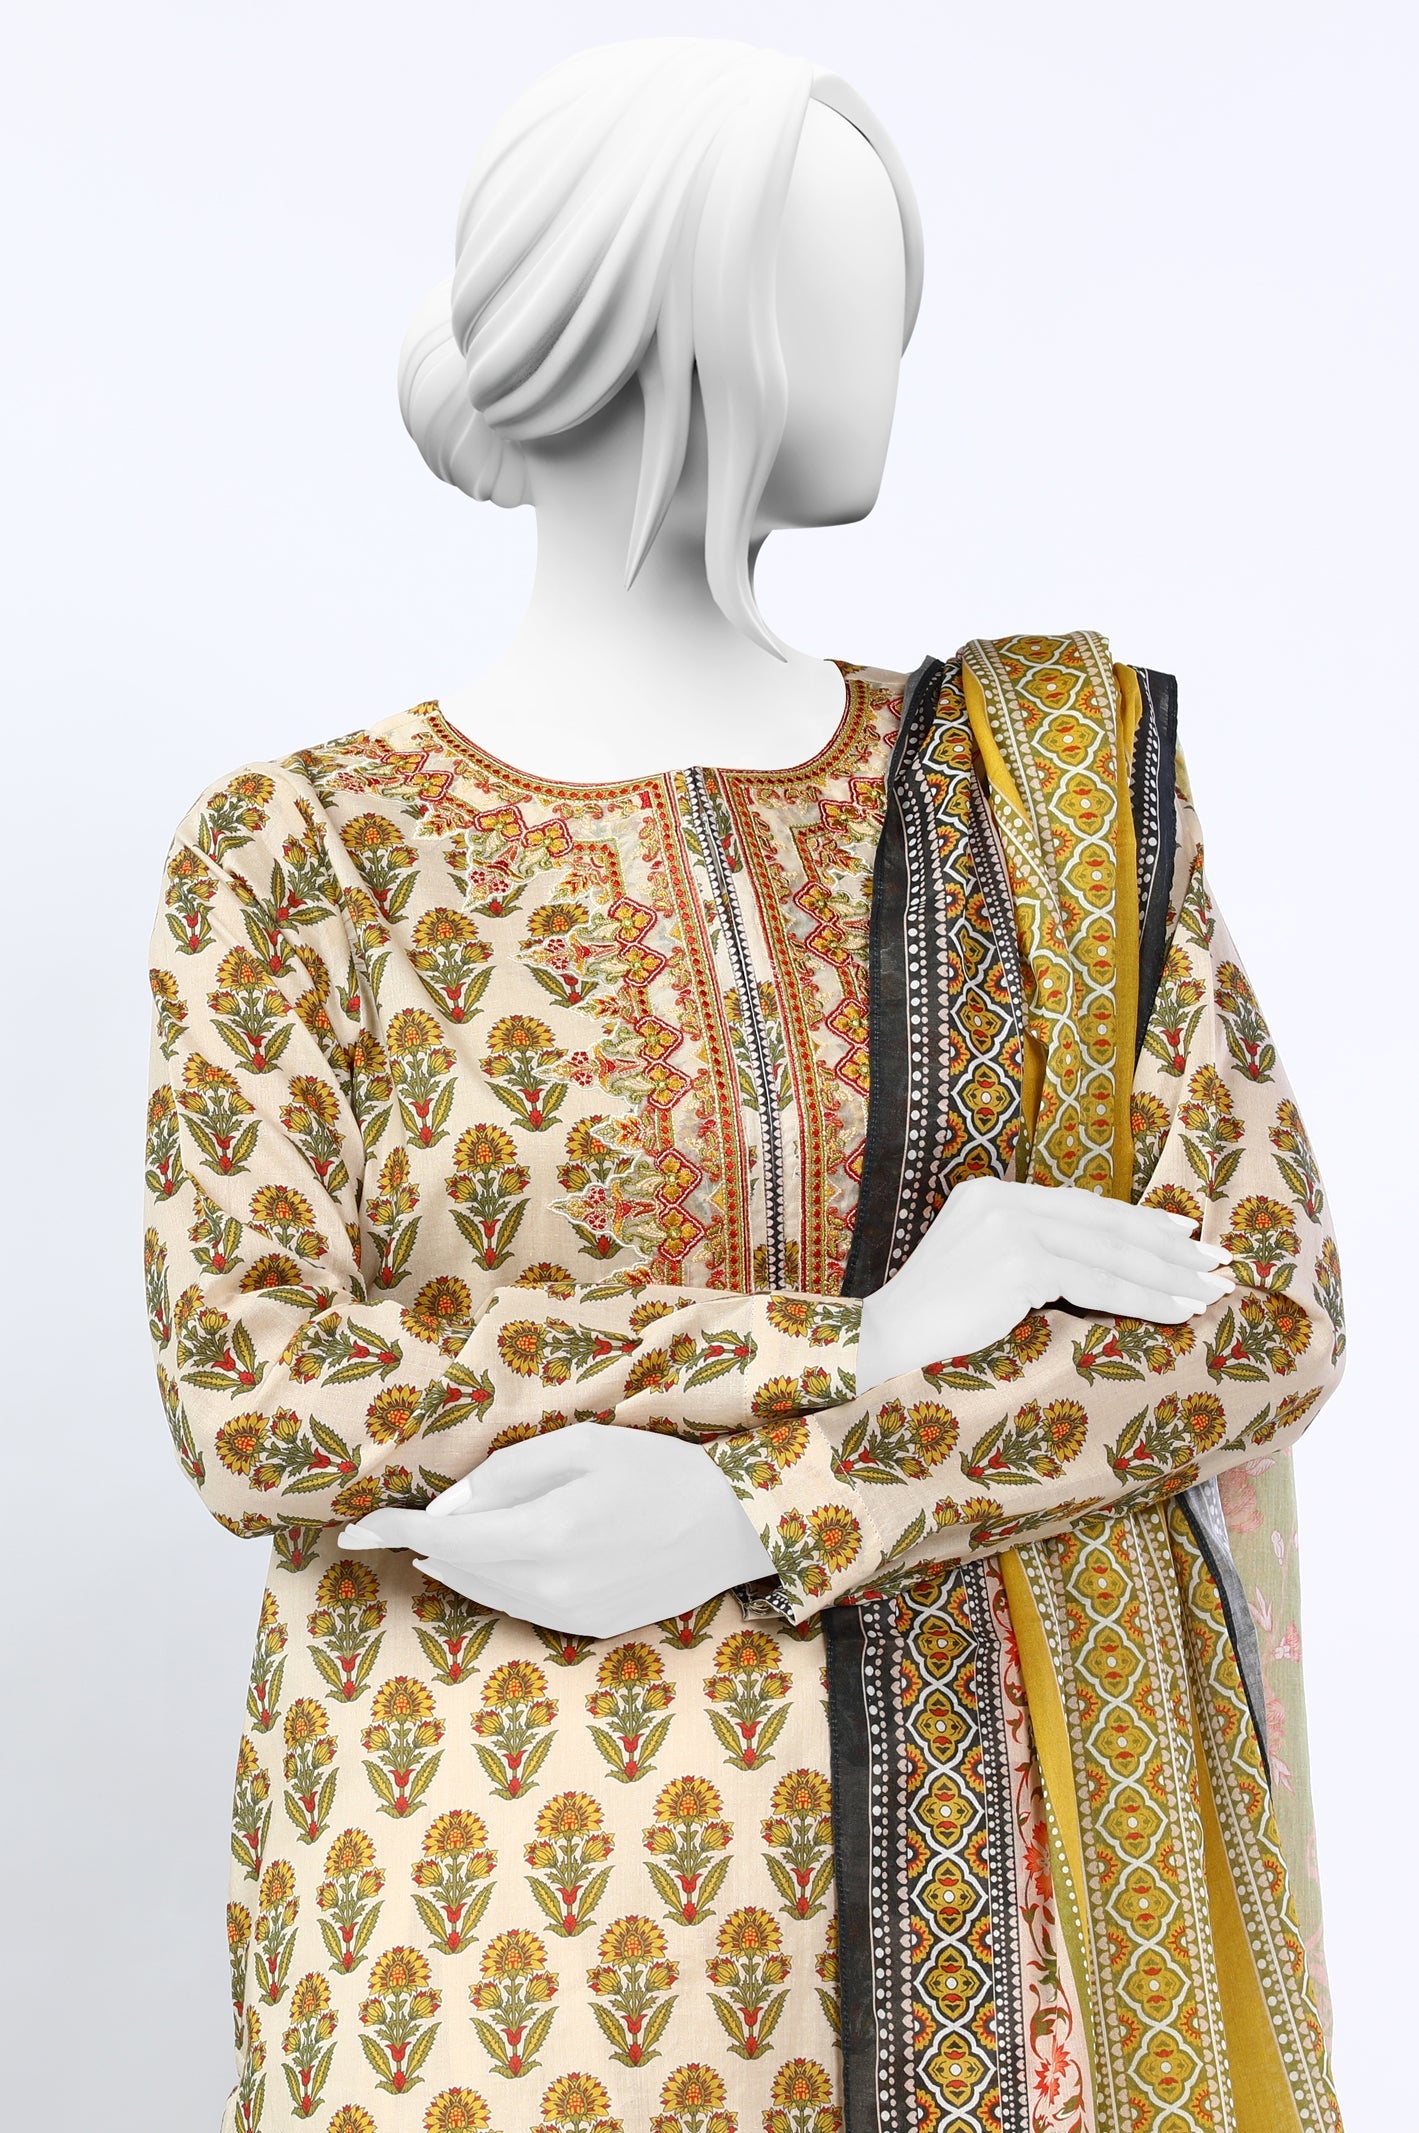 Unstitched 3 Piece Emb Printed Shirt, Printed Dupatta, Dyed Trouser - Diners